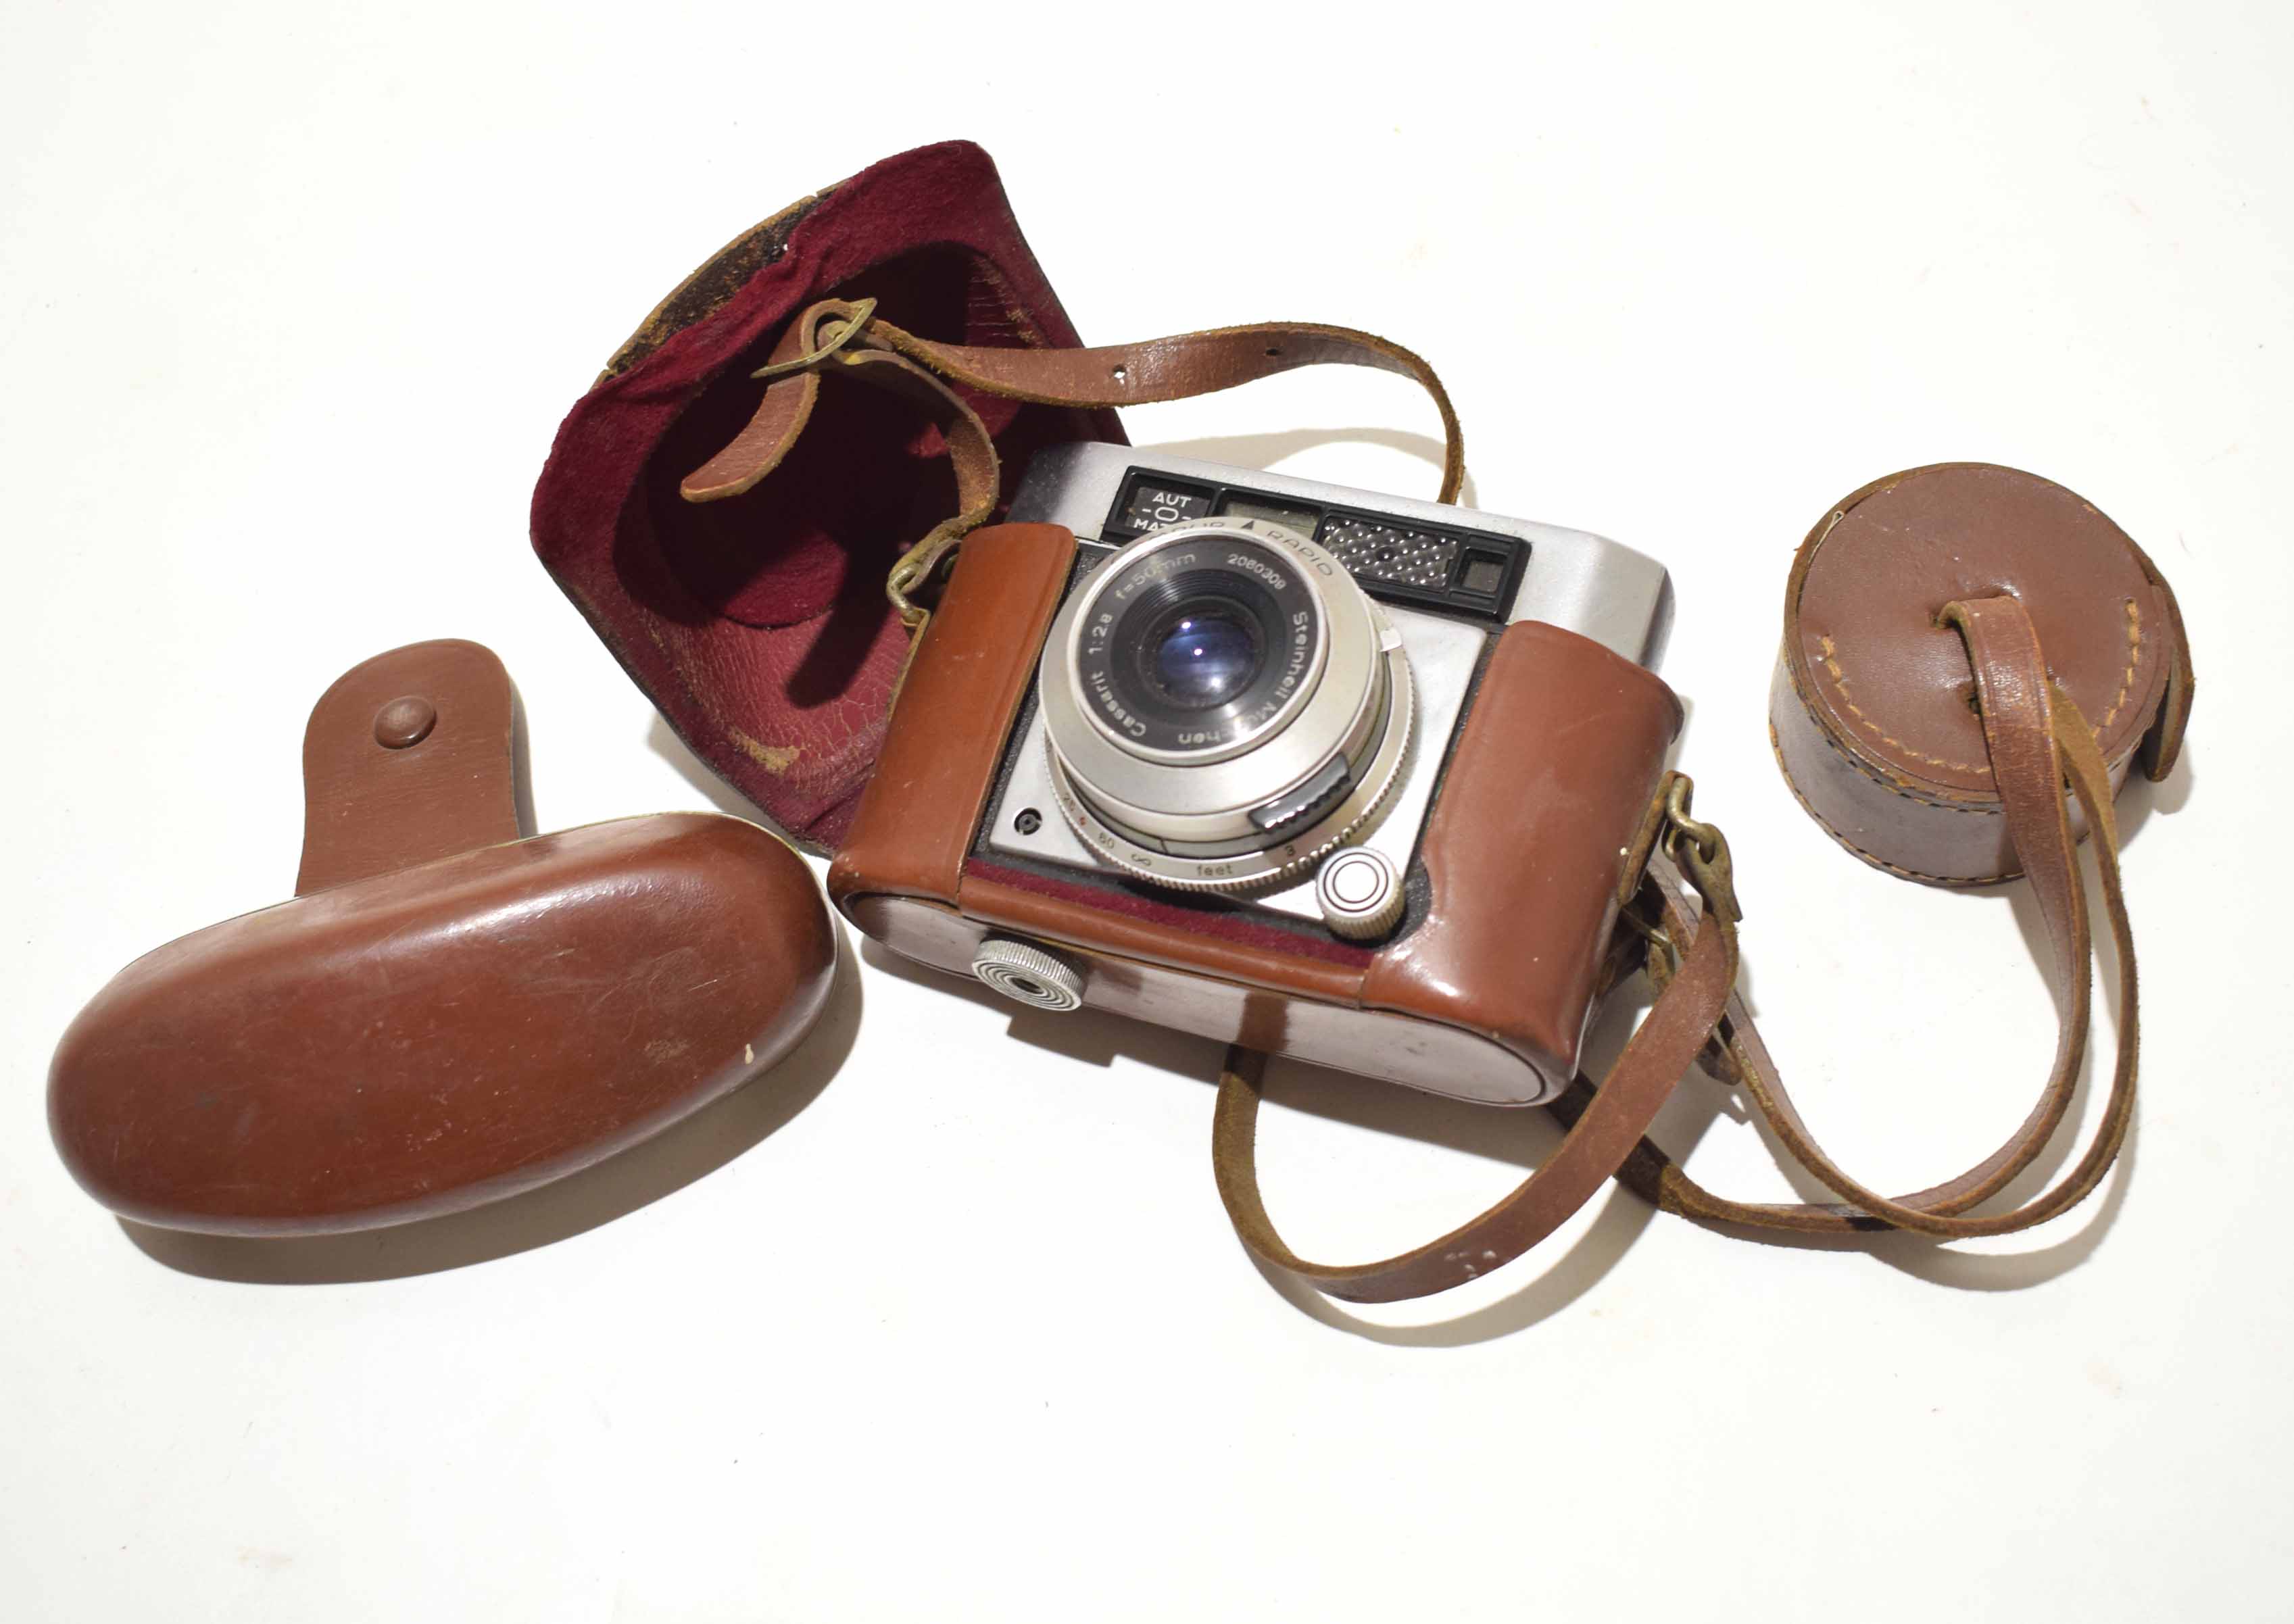 Compur Rapid camera with a Steinheil lens in leather carrying case - Image 2 of 2